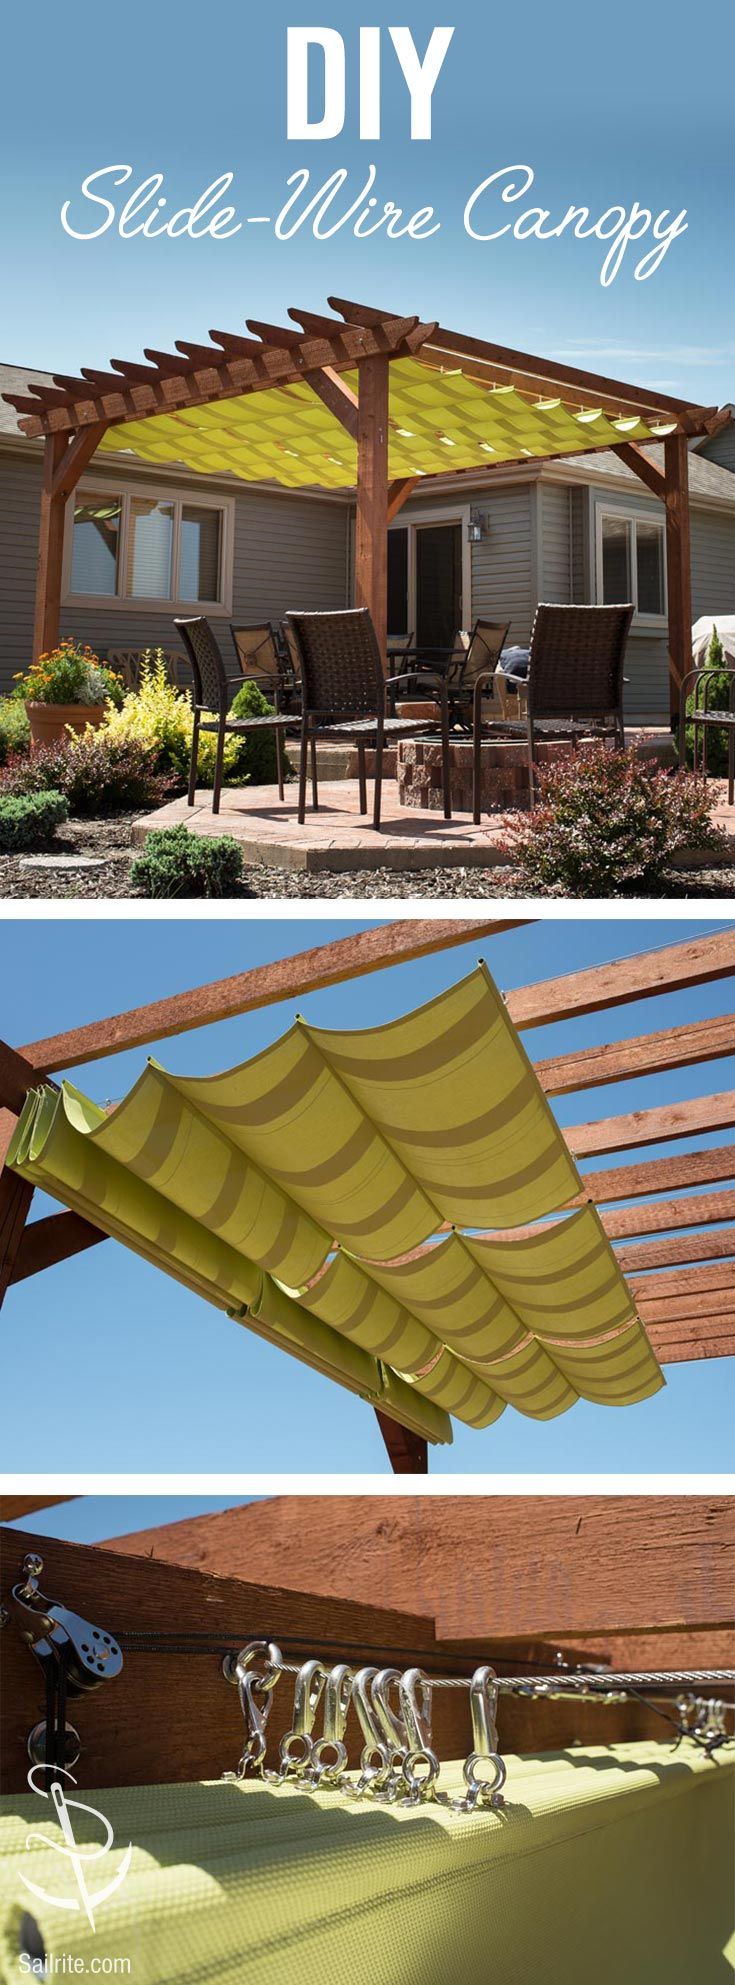 Learn how to make a slide-wire canopy with free how-to video instructions from S...